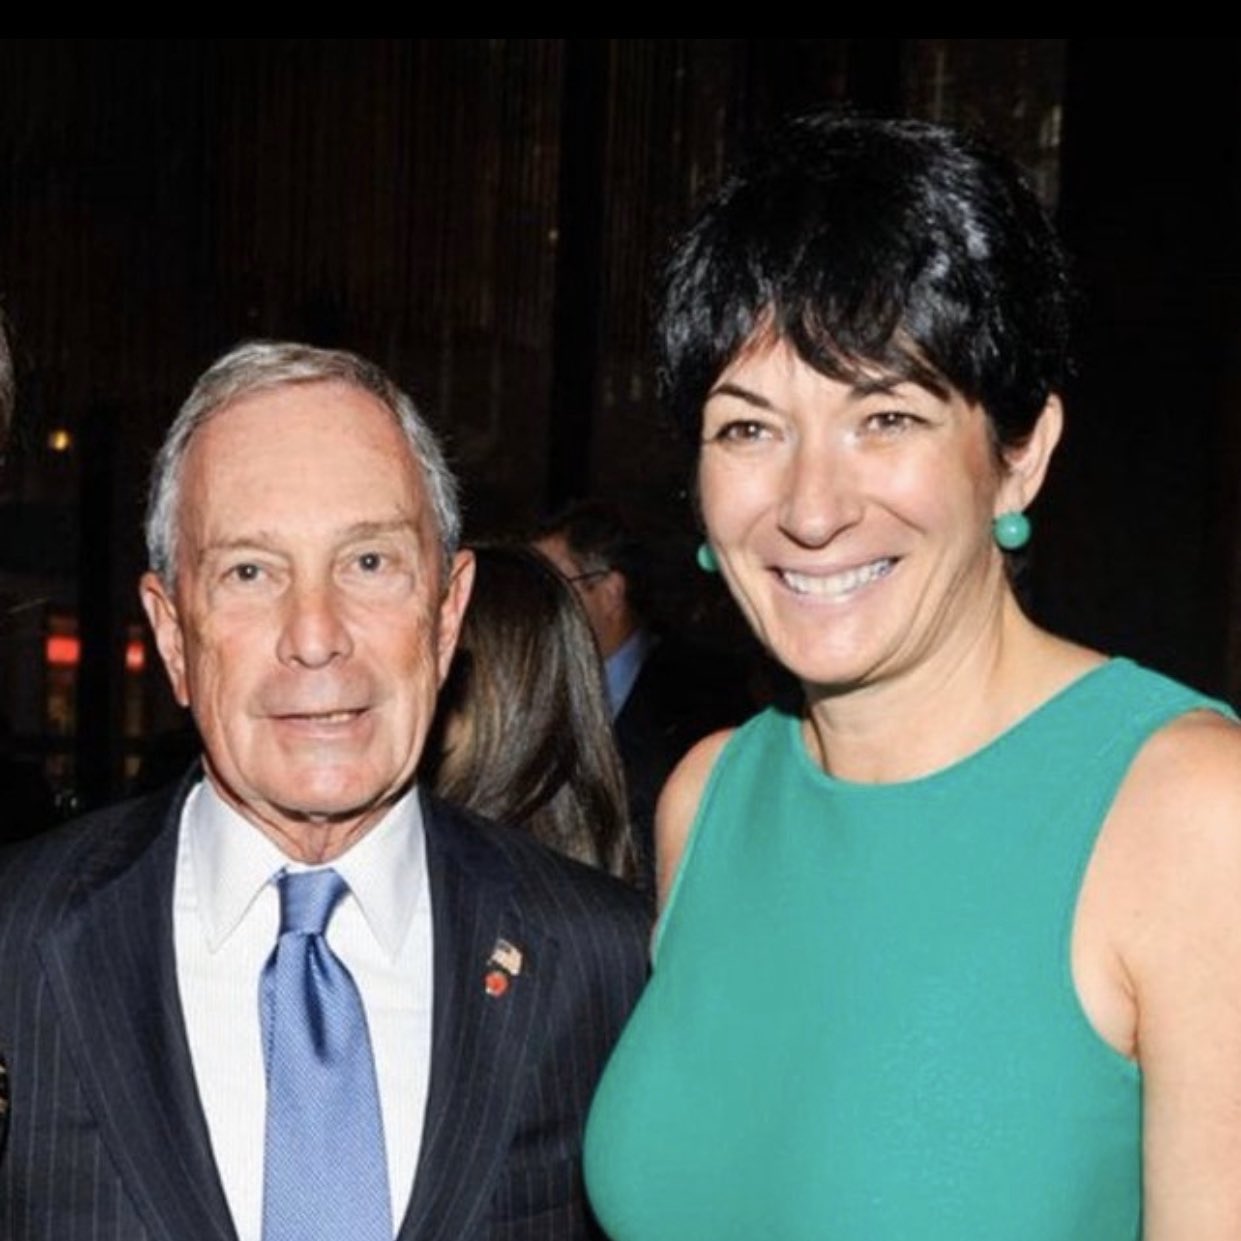 Classy Memes Toxic Mike Bloomberg ToxicBloomberg.com 2020 ...